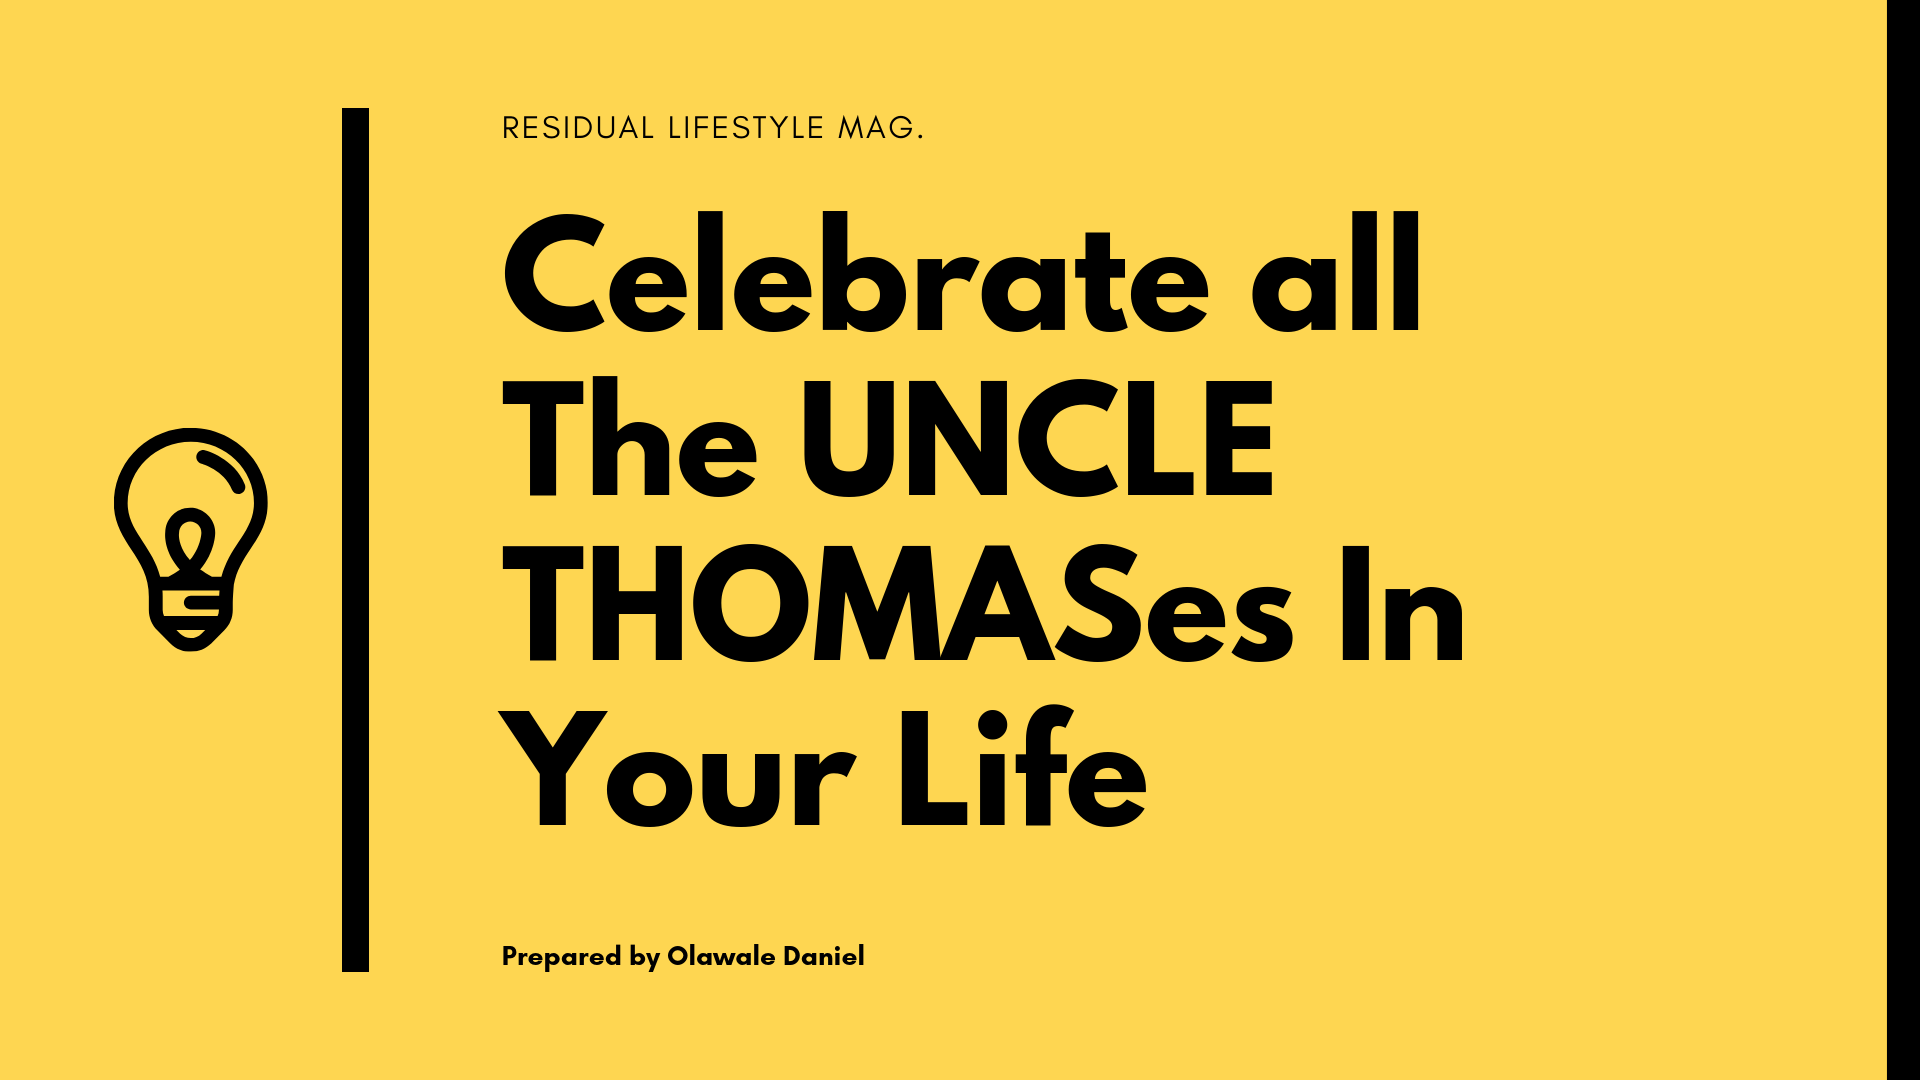 Celebrate all The UNCLE THOMASes In Your Life